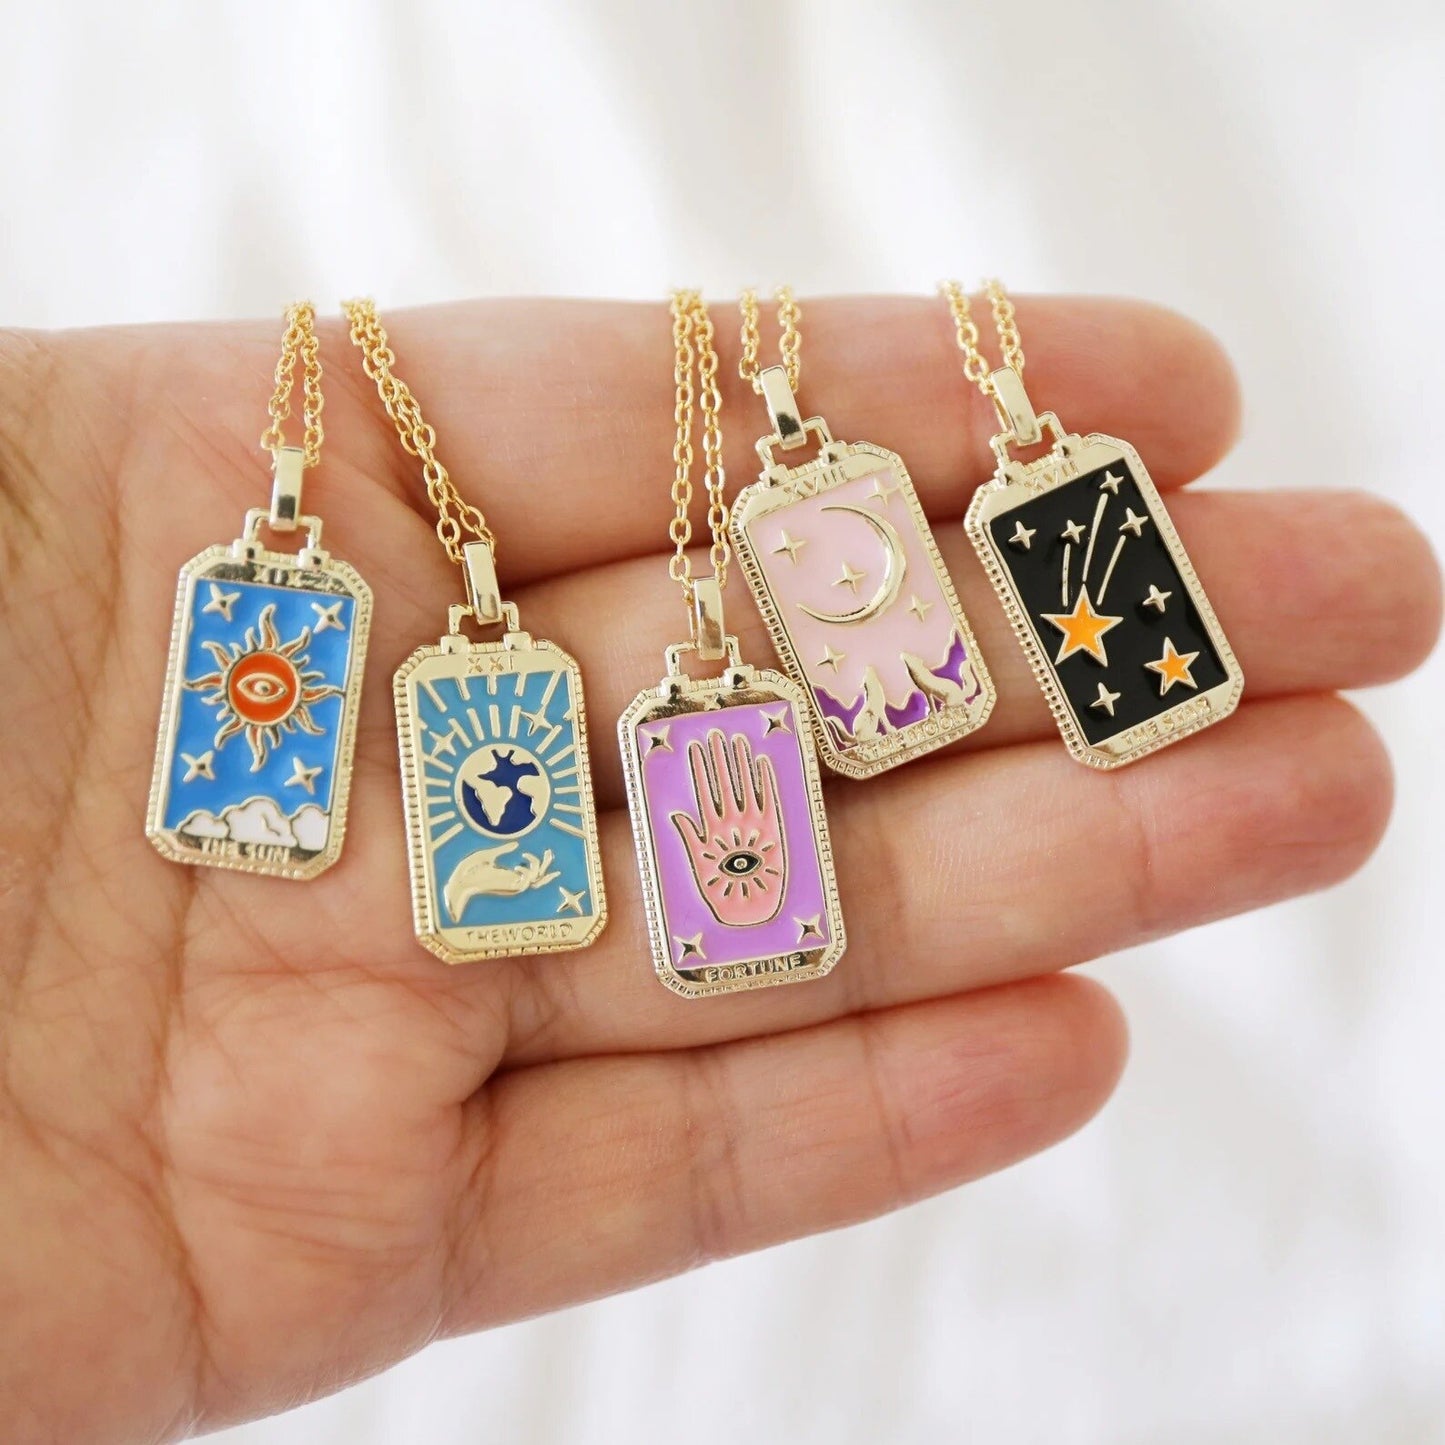 2022 New Stainless Steel Tarnish Free Jewelry Tarot Necklace Star Moon Sun World Design Gold Pendant Necklaces For Women